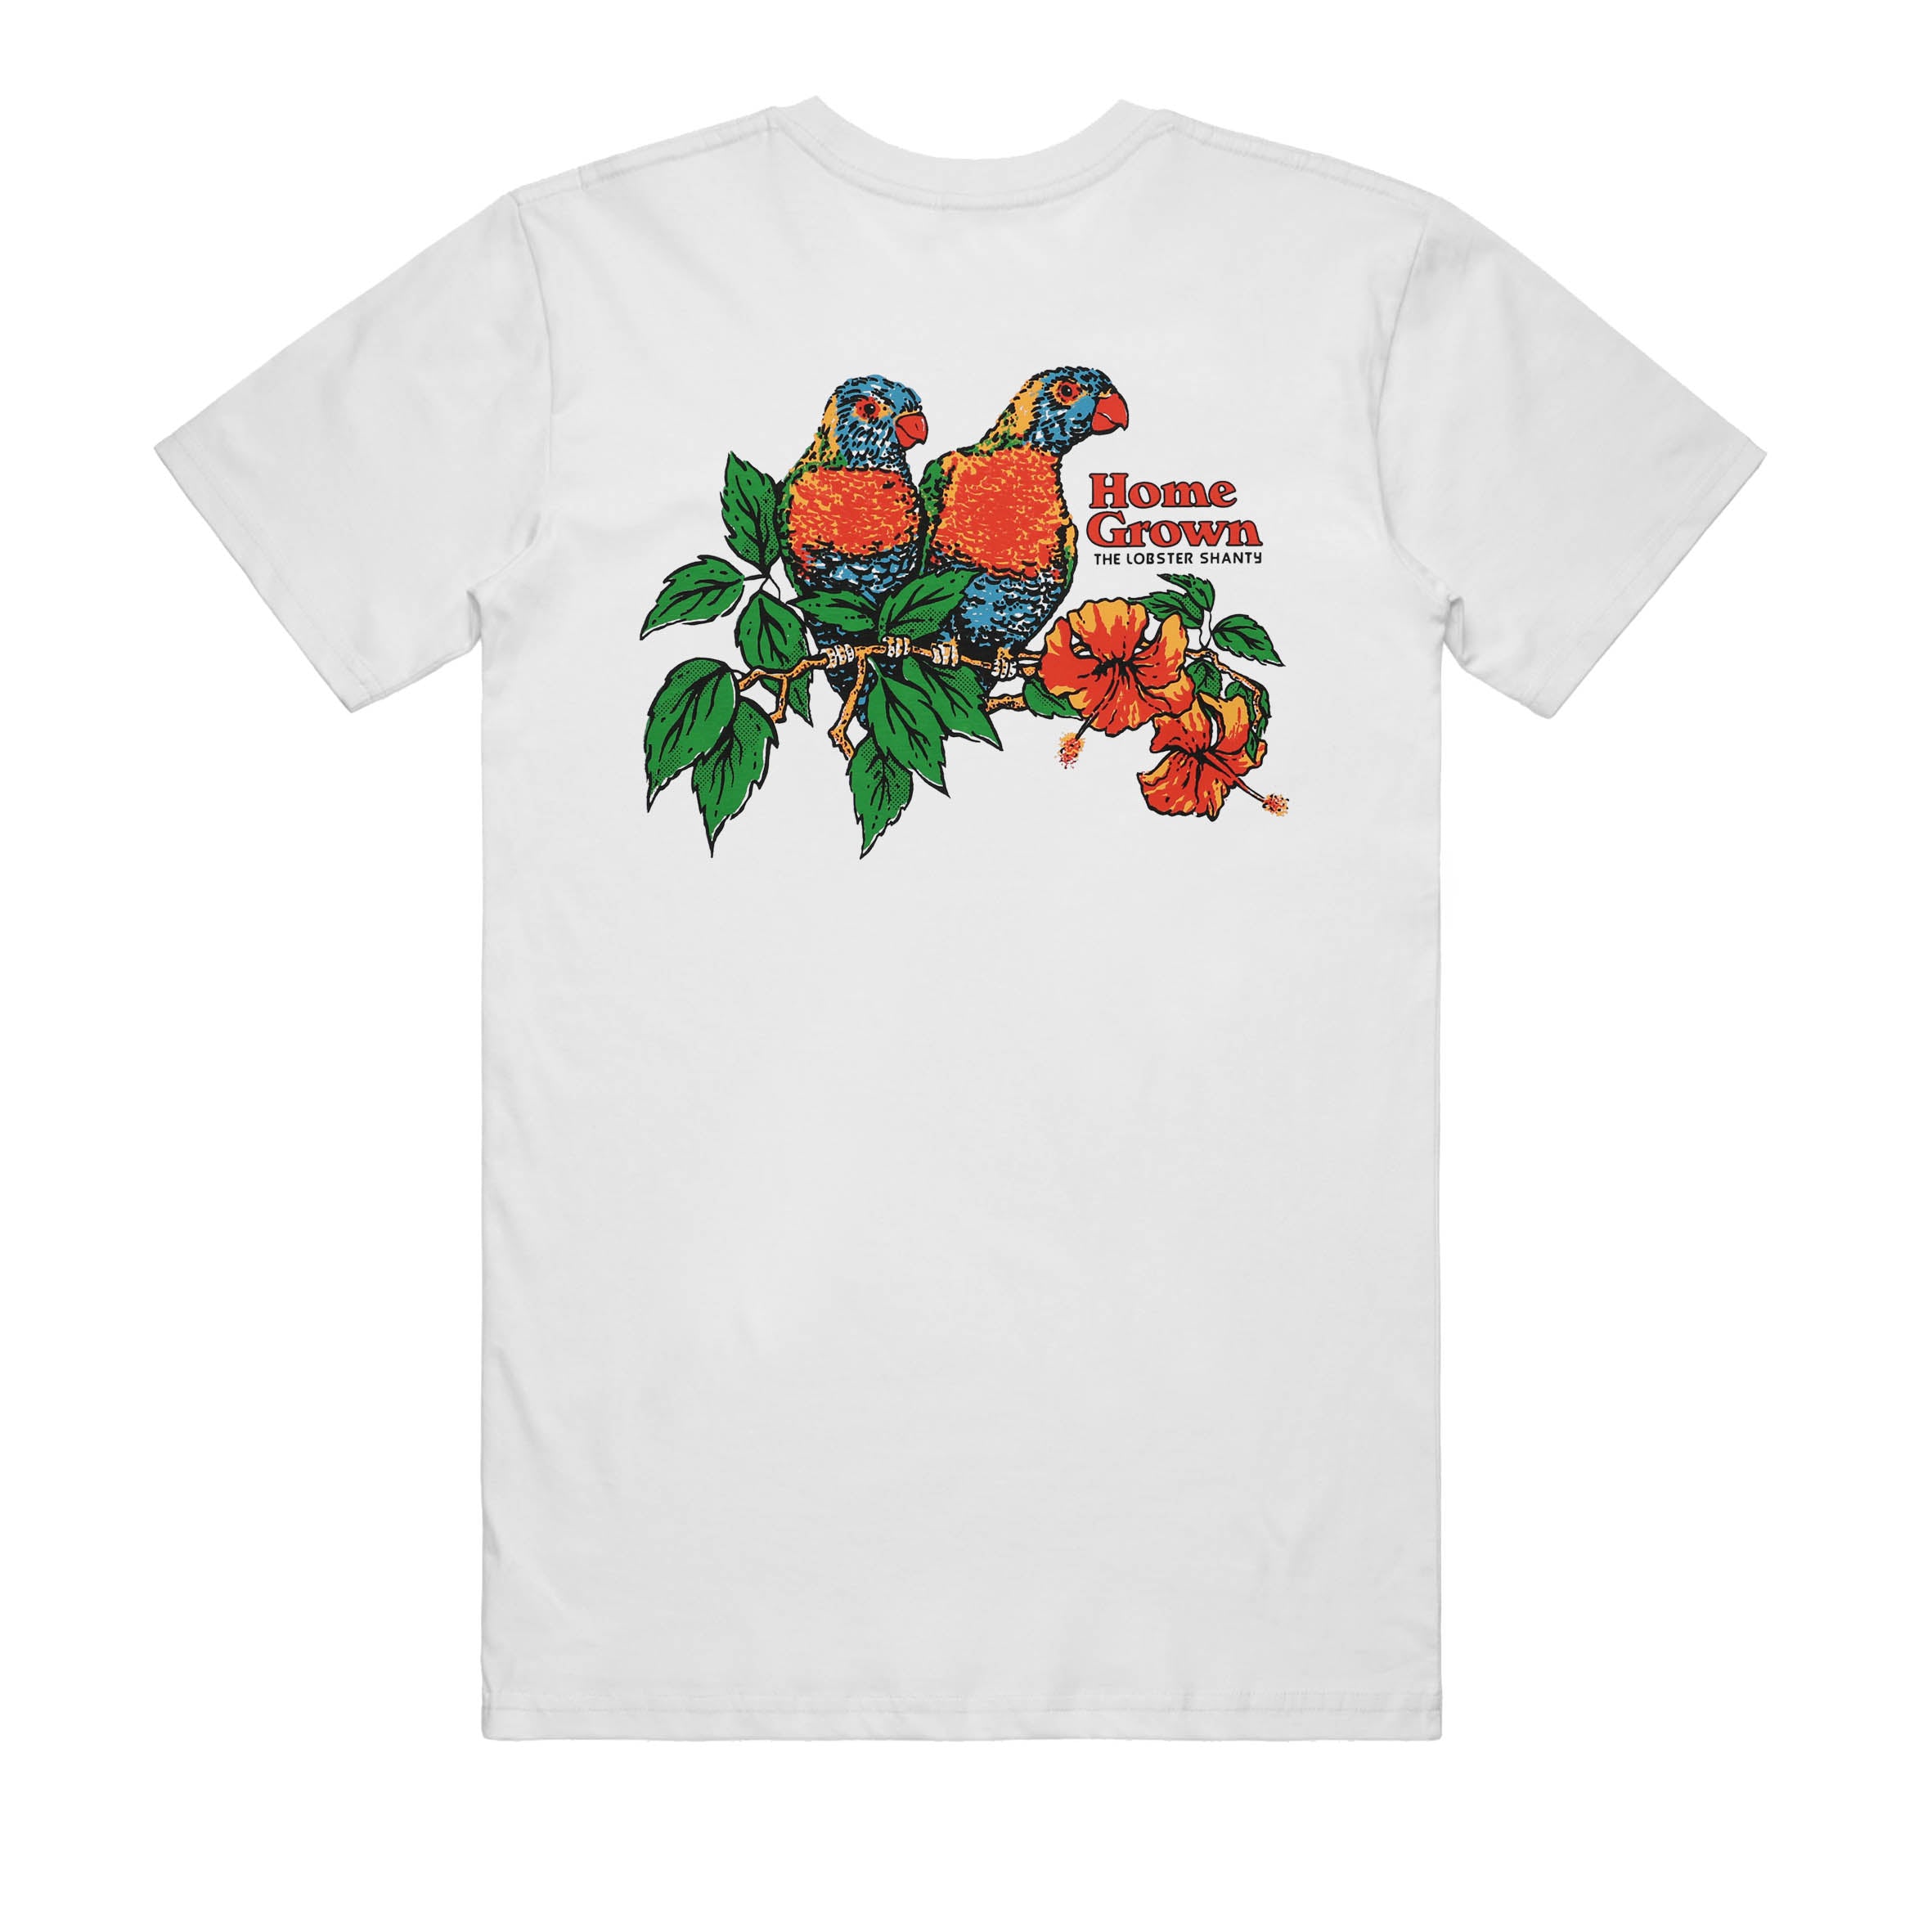 Home Grown - White Tee – Lobster Shanty